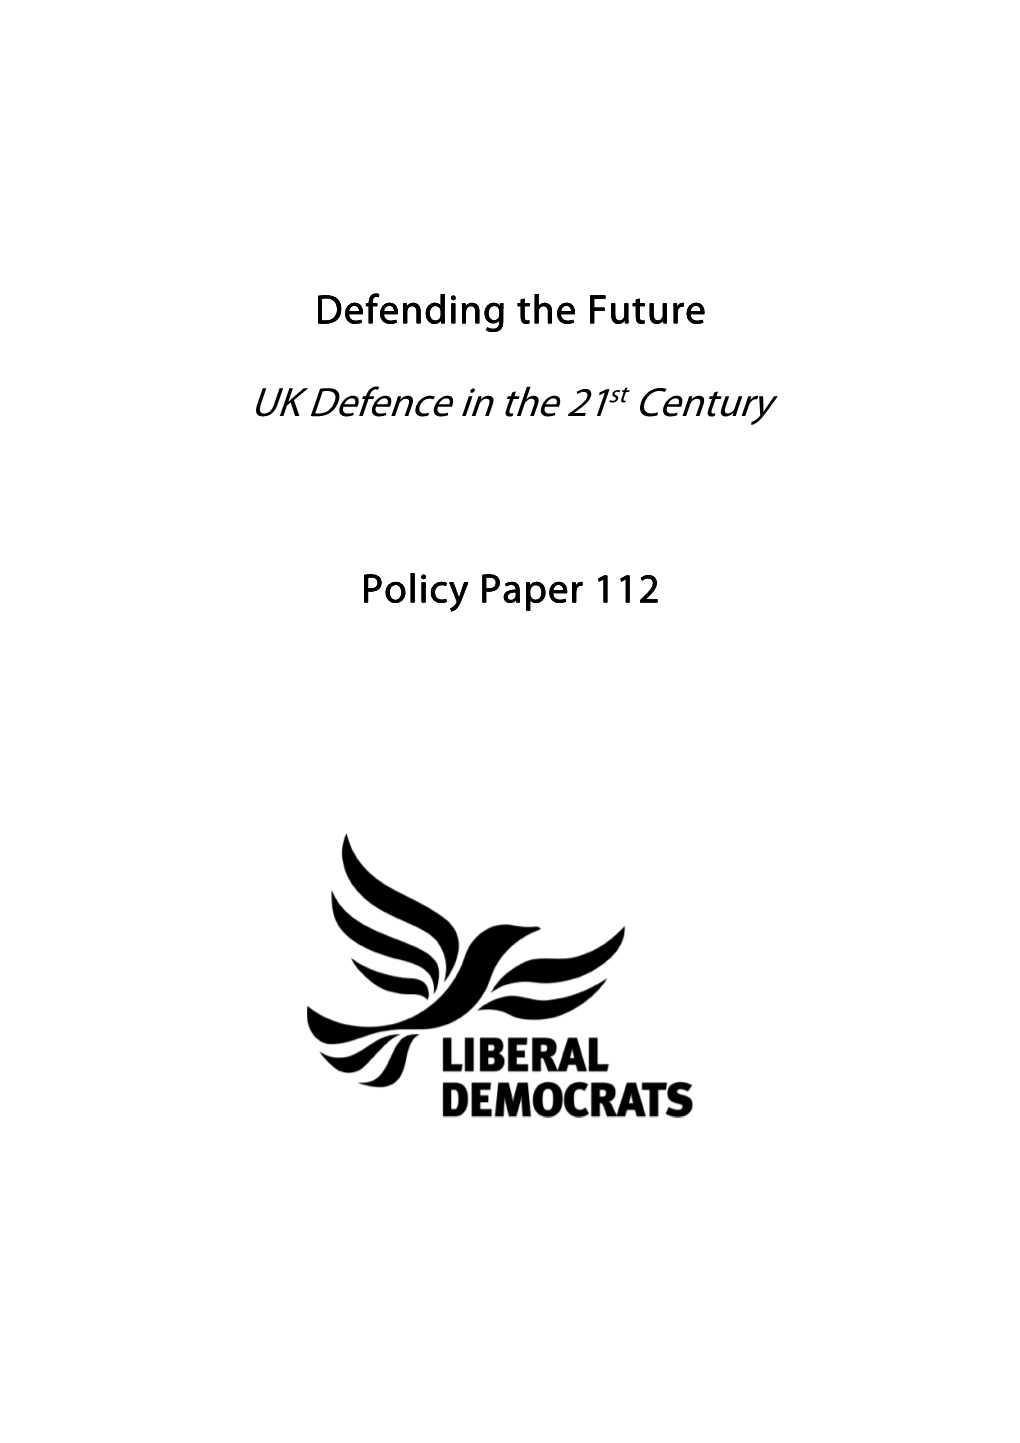 UK Defence in the 21St Century